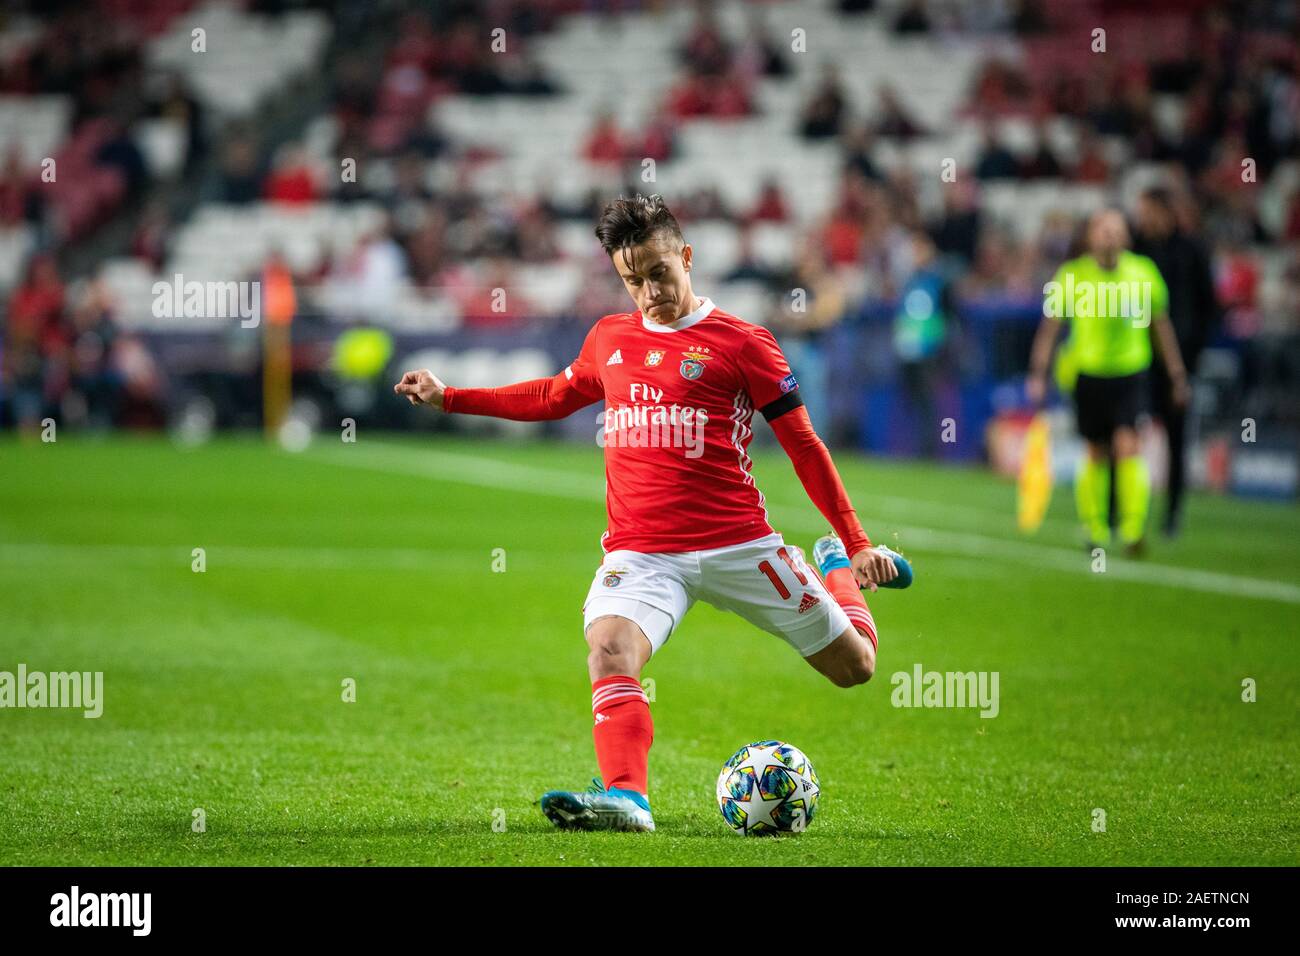 Lisbon, Portugal. 10th Dec, 2019. Franco Cervi of SL Benfica seen in action during the UEFA Champions League 2019/2020 football match between SL Benfica and FC Zenit in Lisbon.(Final score; SL Benfica Lisbon 3:0 FC Zenit) Credit: SOPA Images Limited/Alamy Live News Stock Photo